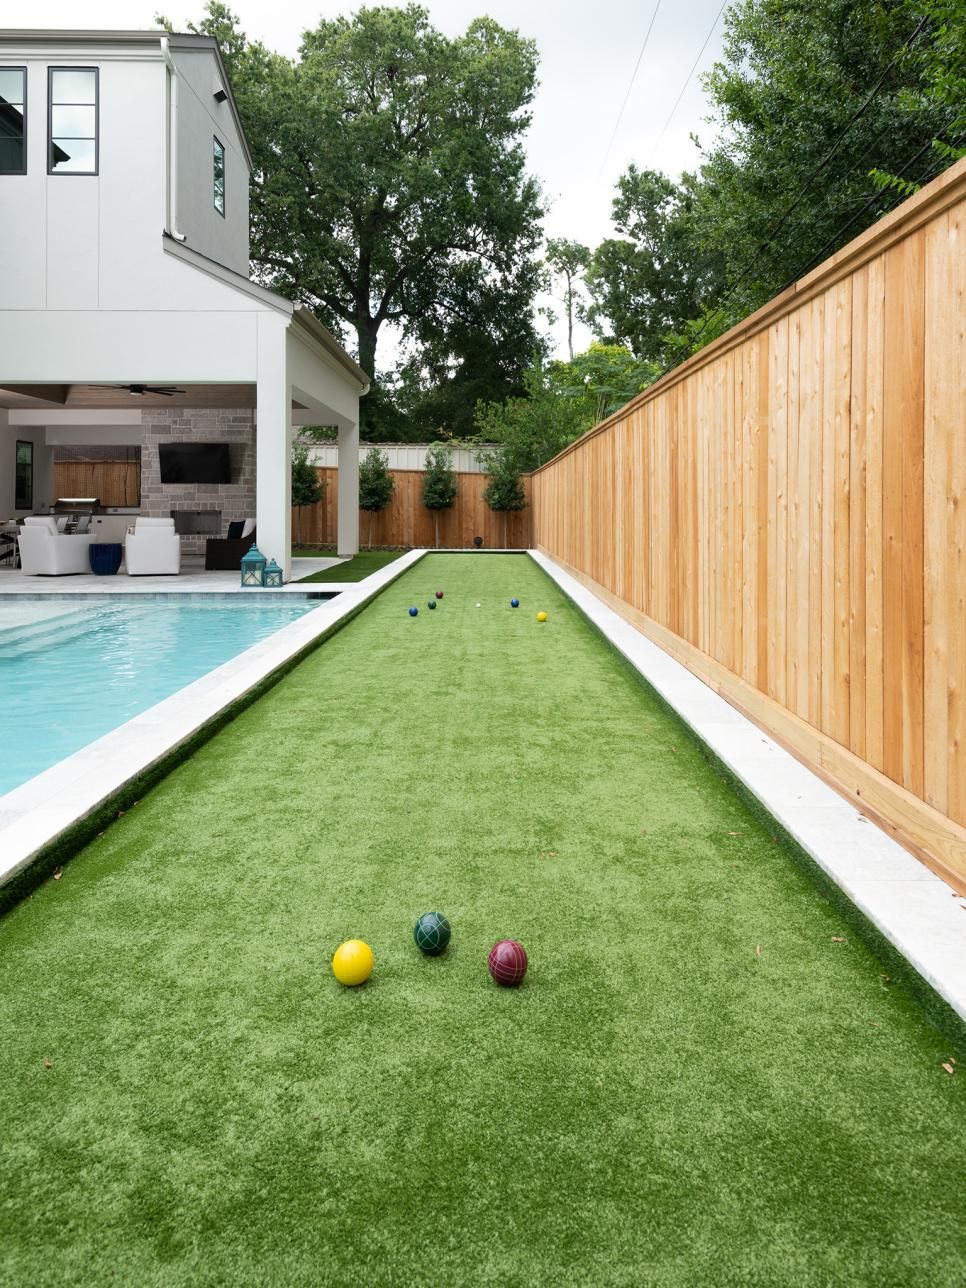 Innovative Backyard Concepts to Spice Up Your Outdoor Space